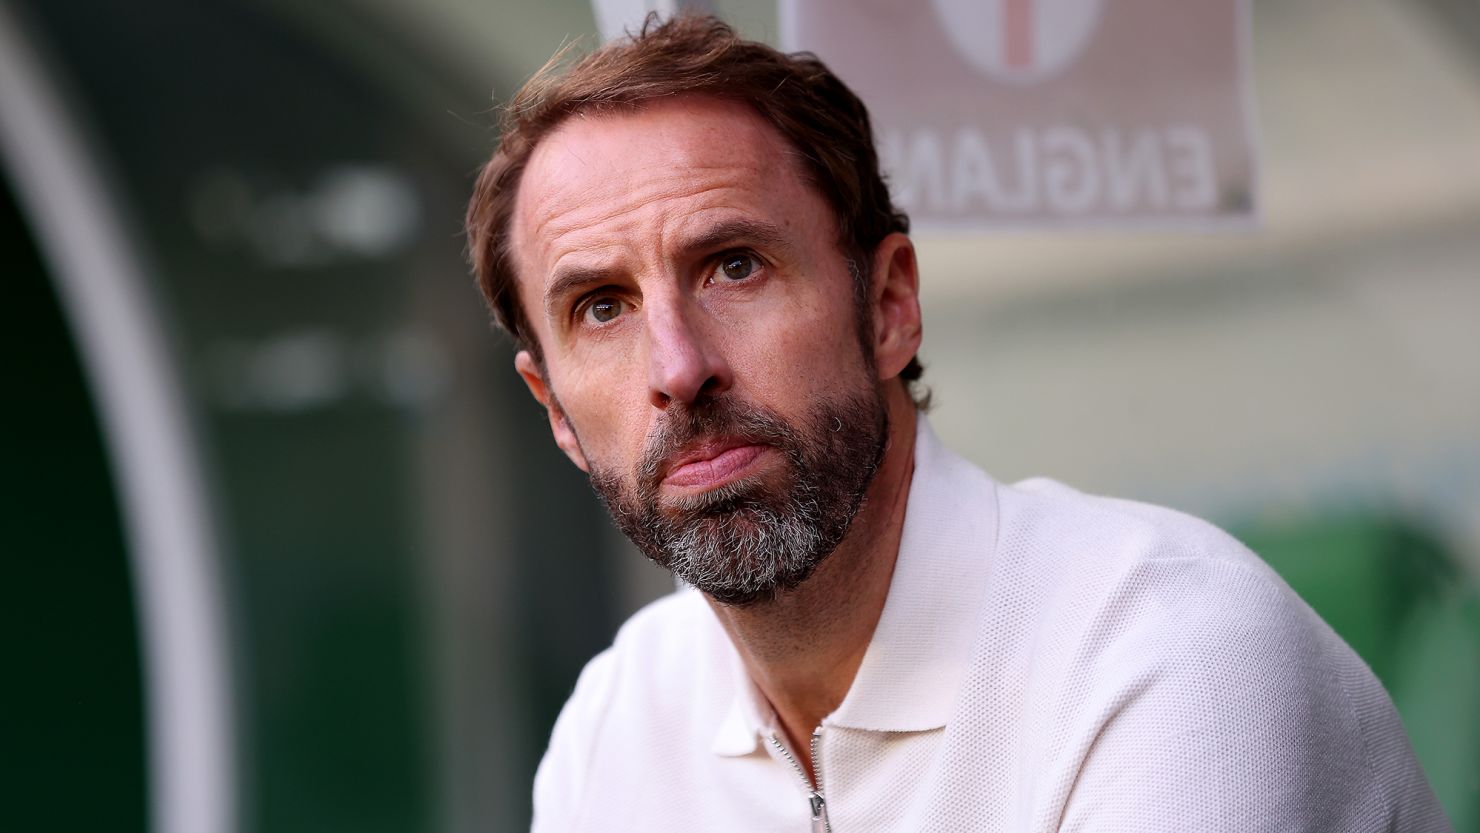 Gareth Southgate is hoping to lead the England men's national team to a first major trophy in 58 years.